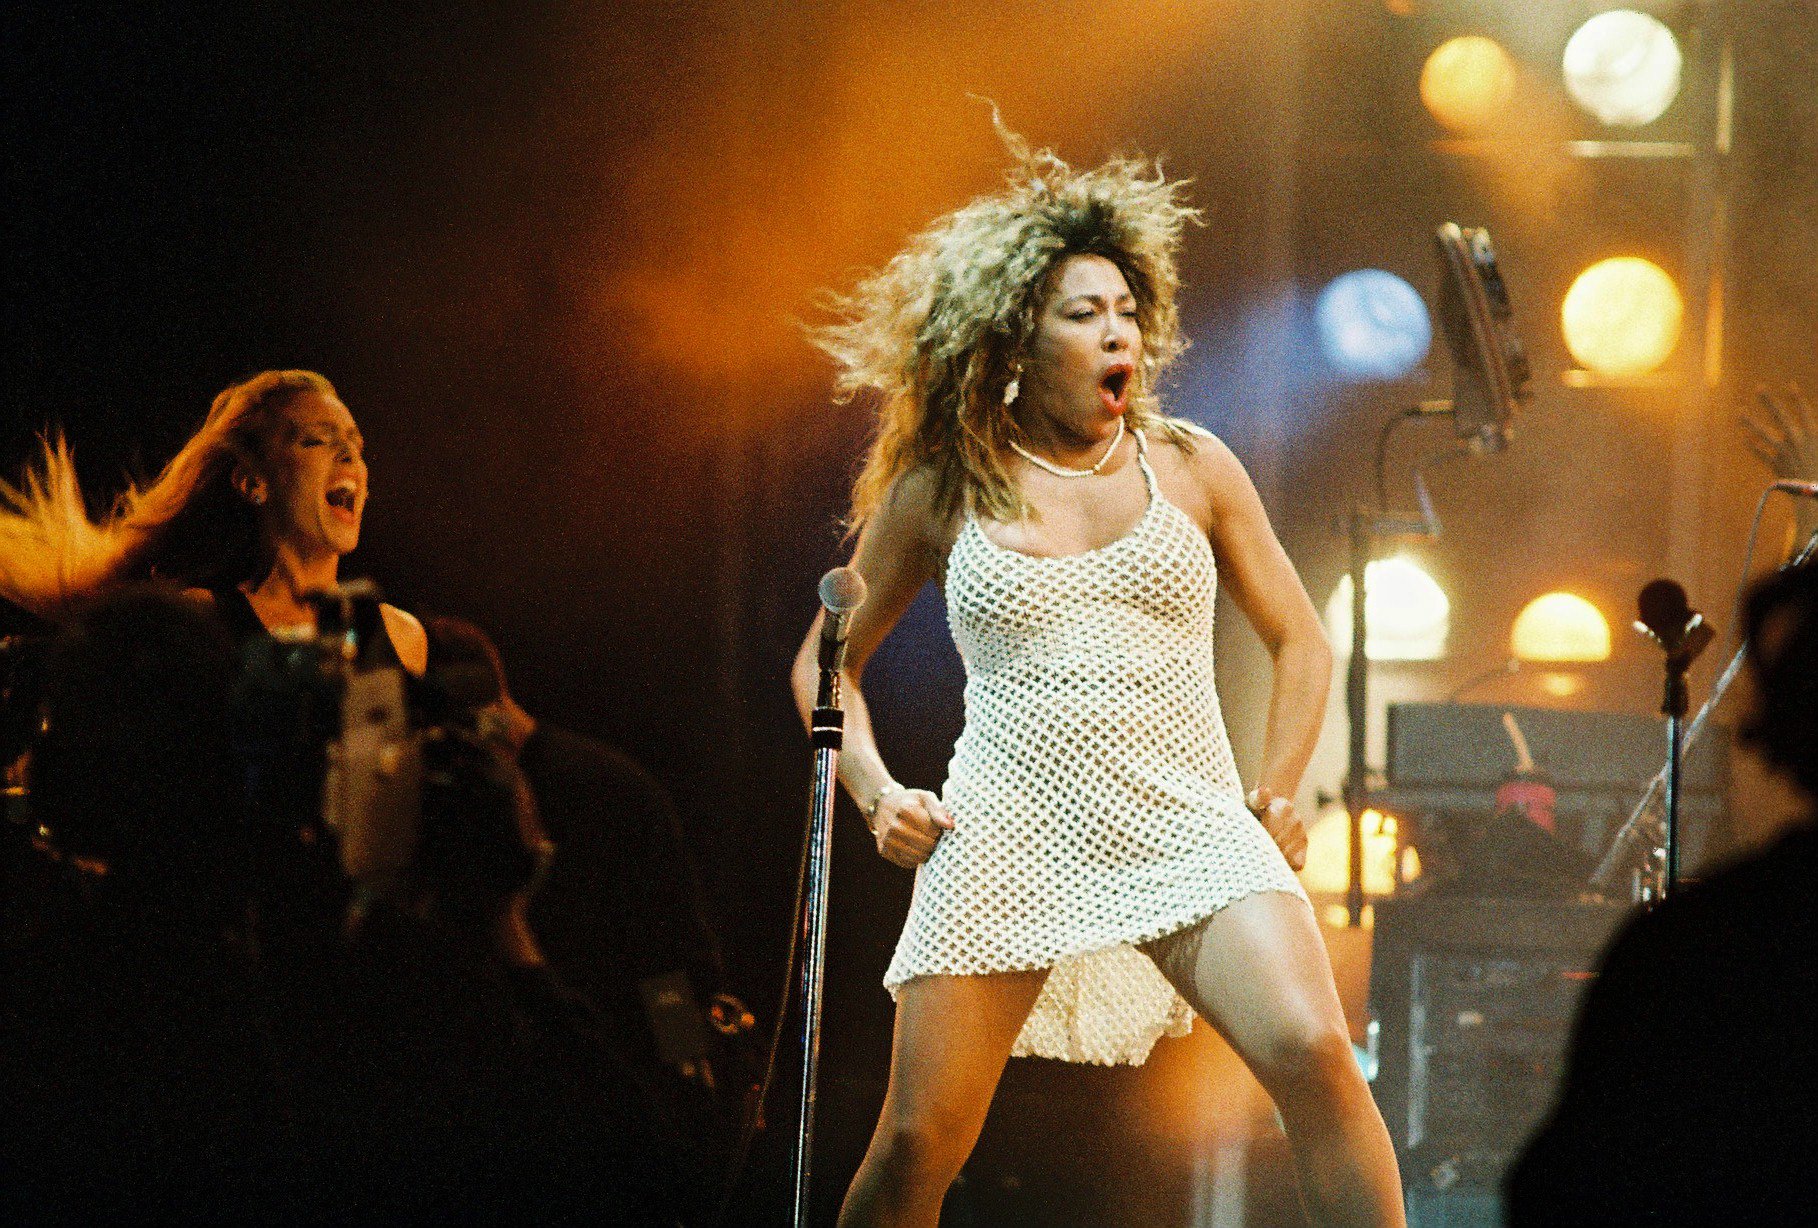 Tina Turner dancing and singing at her 'Foreign Affair' tour.